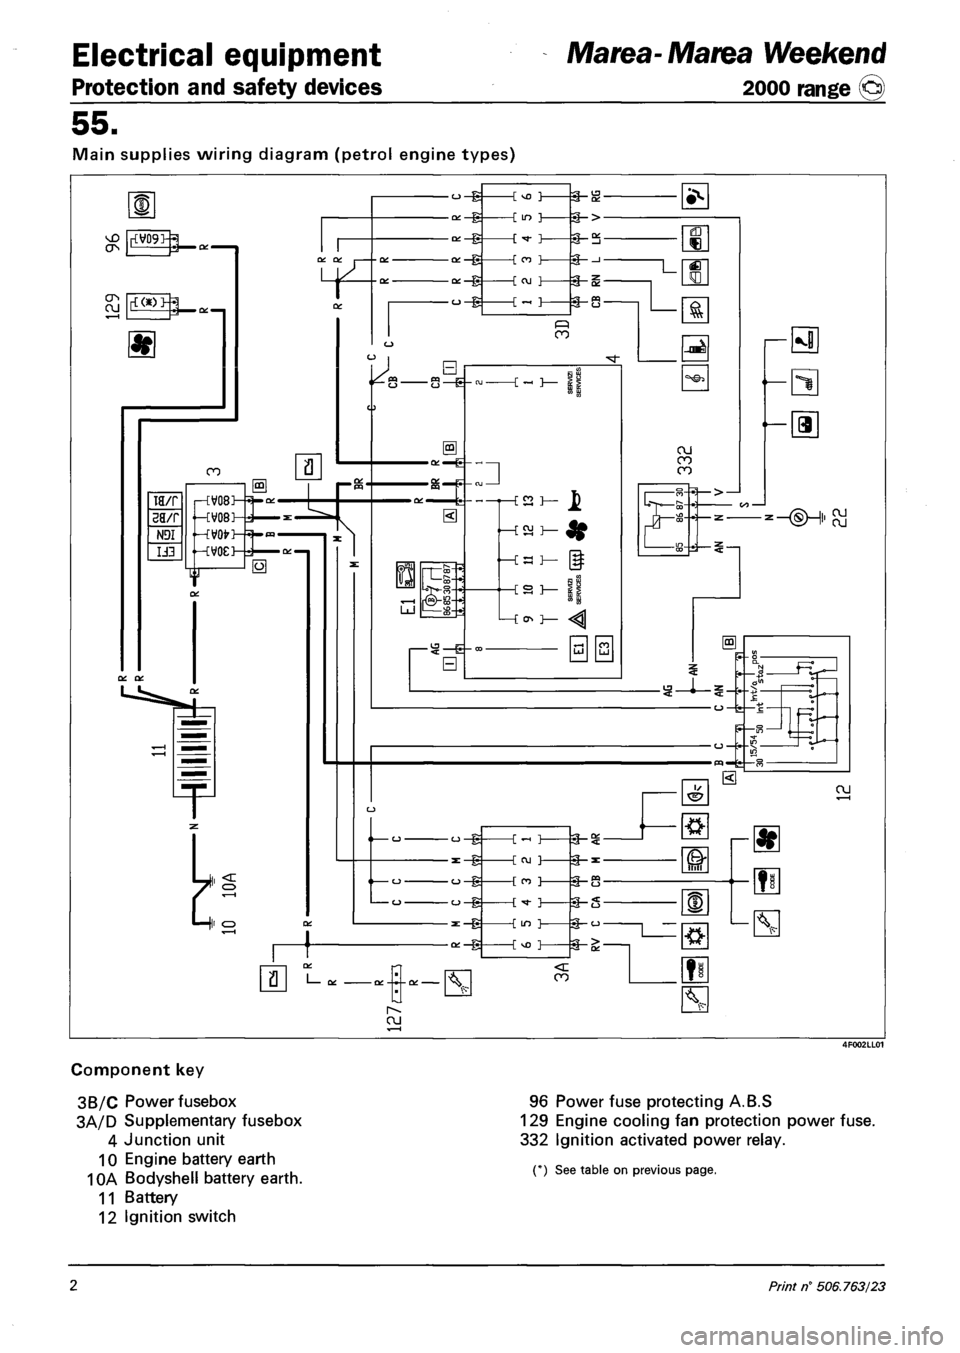 FIAT MAREA 2001 1.G Workshop Manual Electrical equipment 
Protection and safety devices 
Marea- Marea Weekend 
2000 range ©) 
55. 
Main supplies wiring diagram (petrol engine types) 
Component key 
3B/C Power fusebox 
3A/D Supplementar